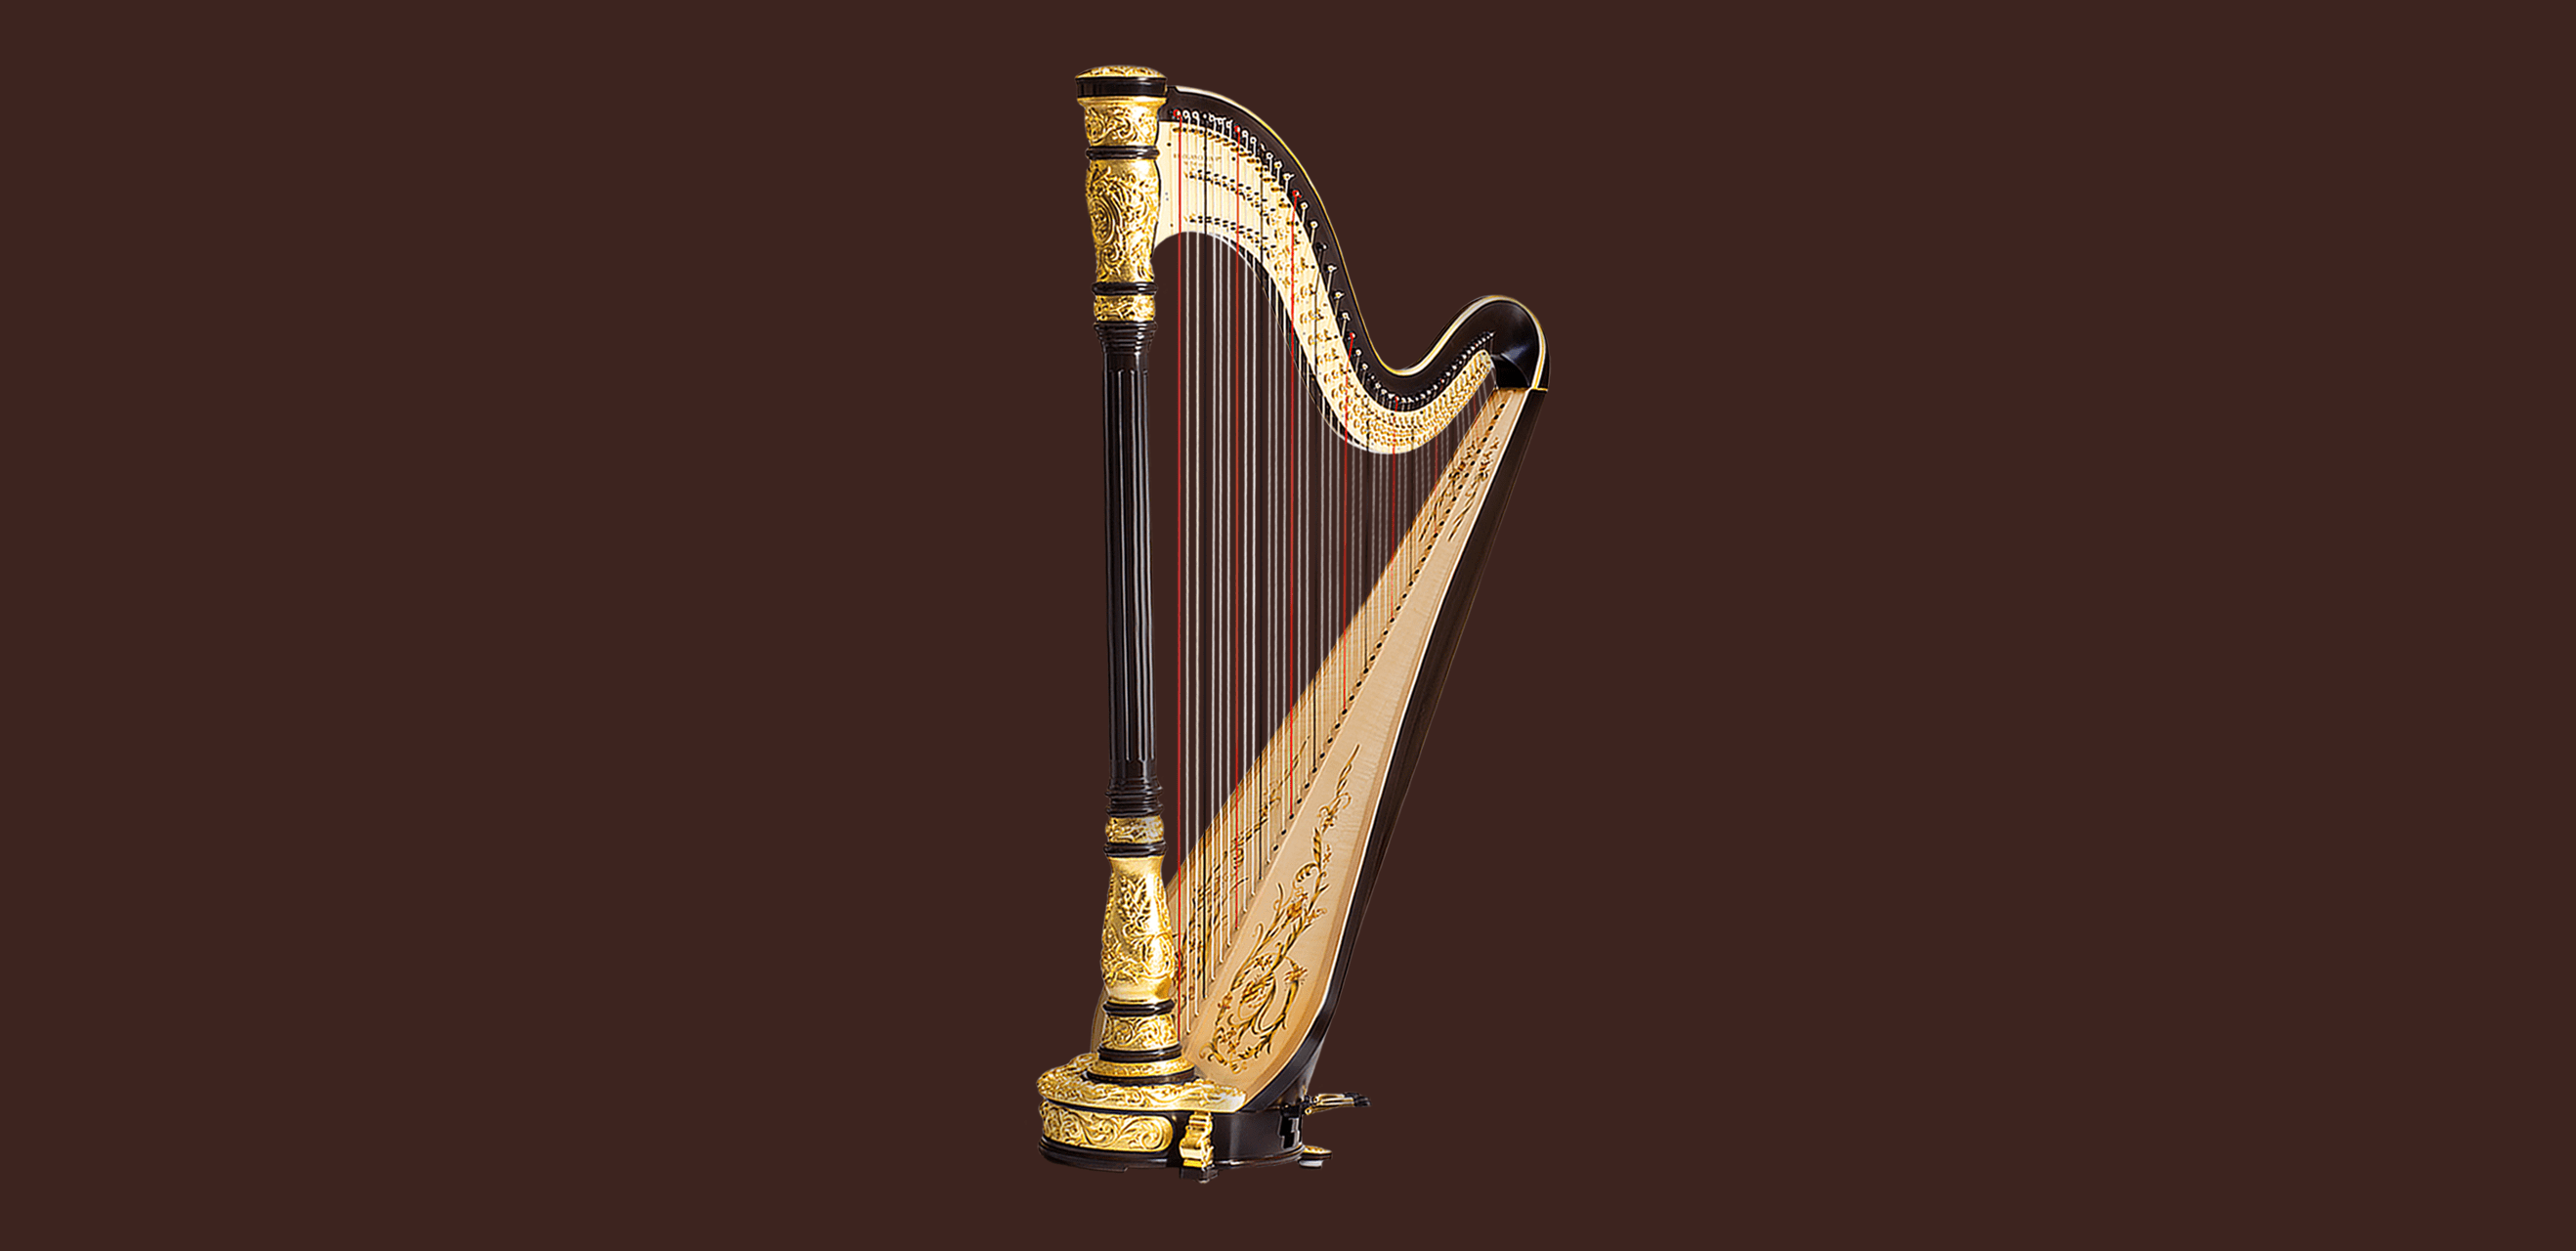 Centurion Harp 1 is Available Now